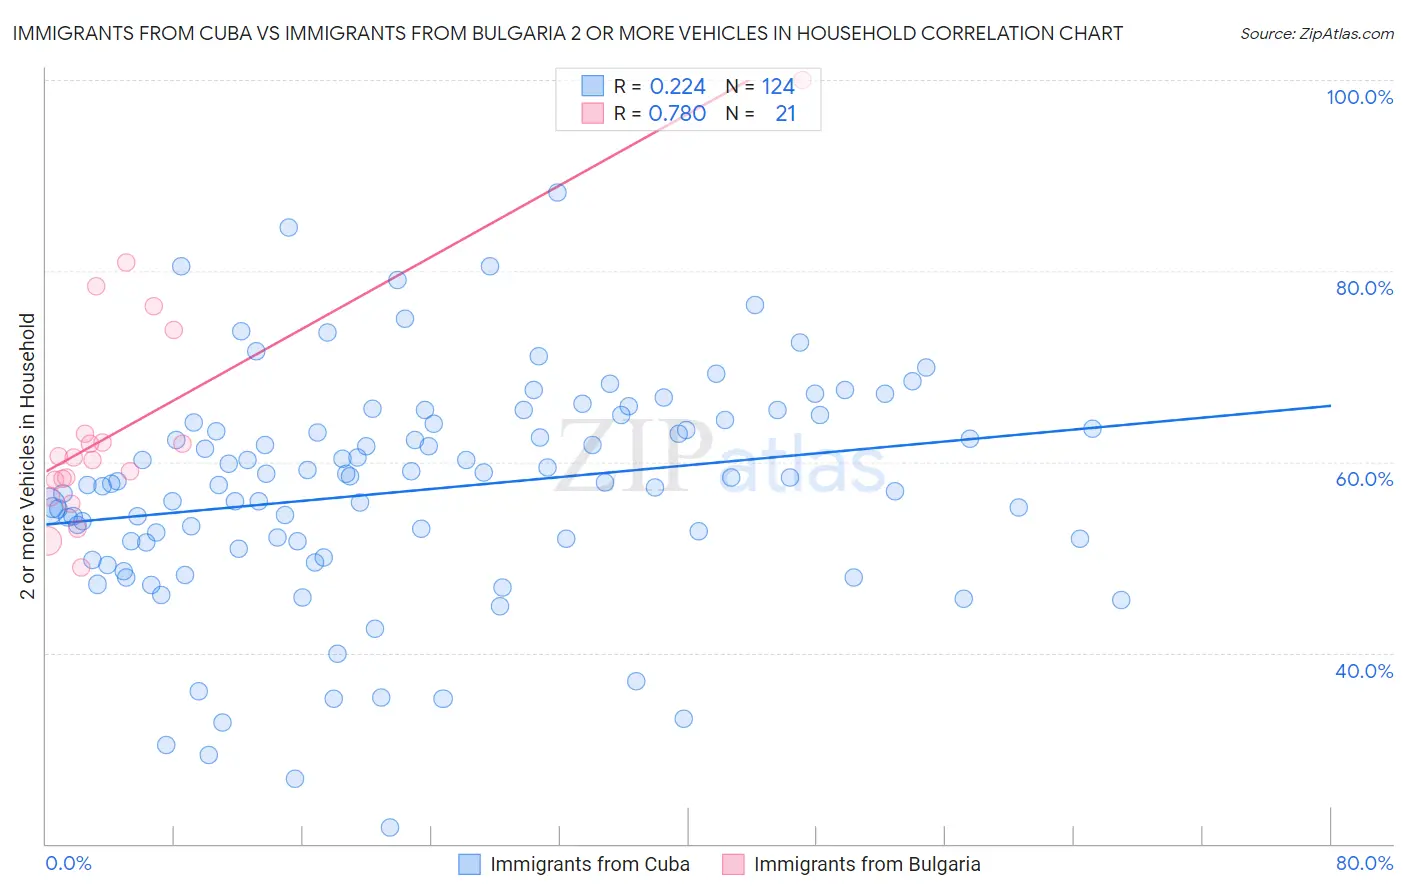 Immigrants from Cuba vs Immigrants from Bulgaria 2 or more Vehicles in Household